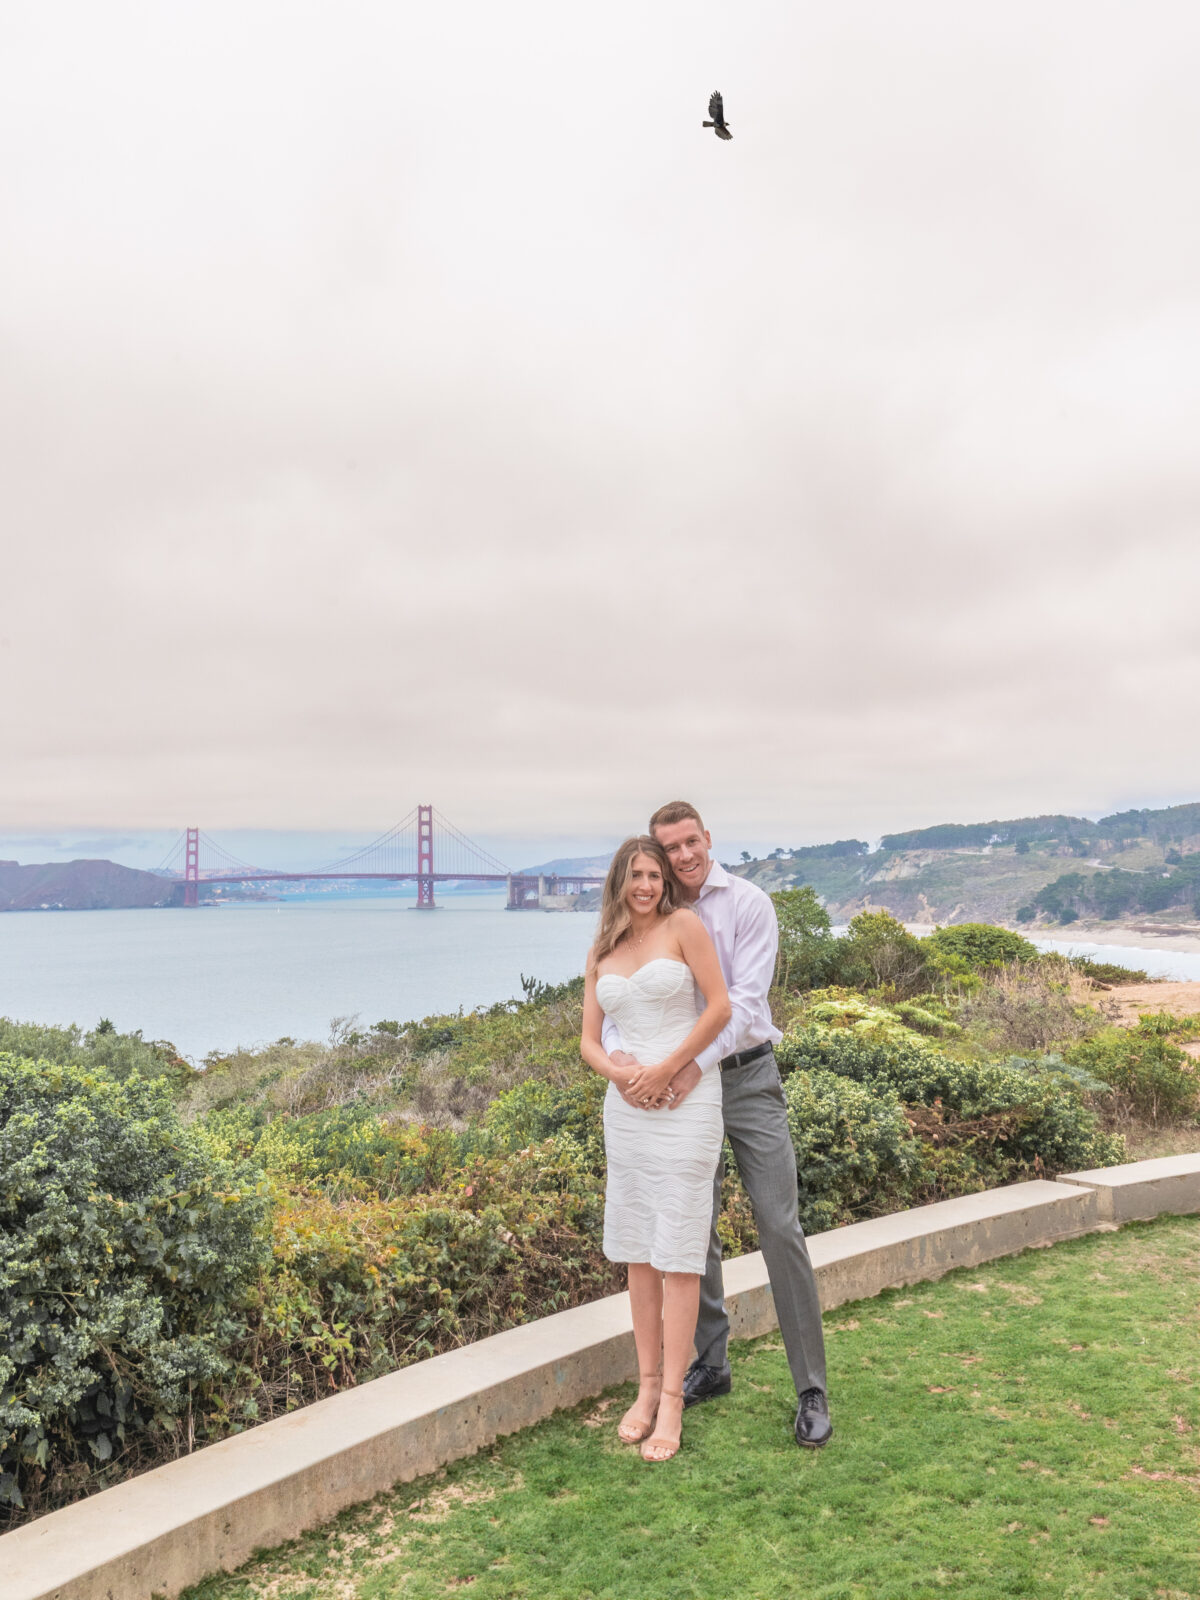 Couple Portrait with Golden Gate Bridge and bird for Engagement Photo Session in San Francisco 